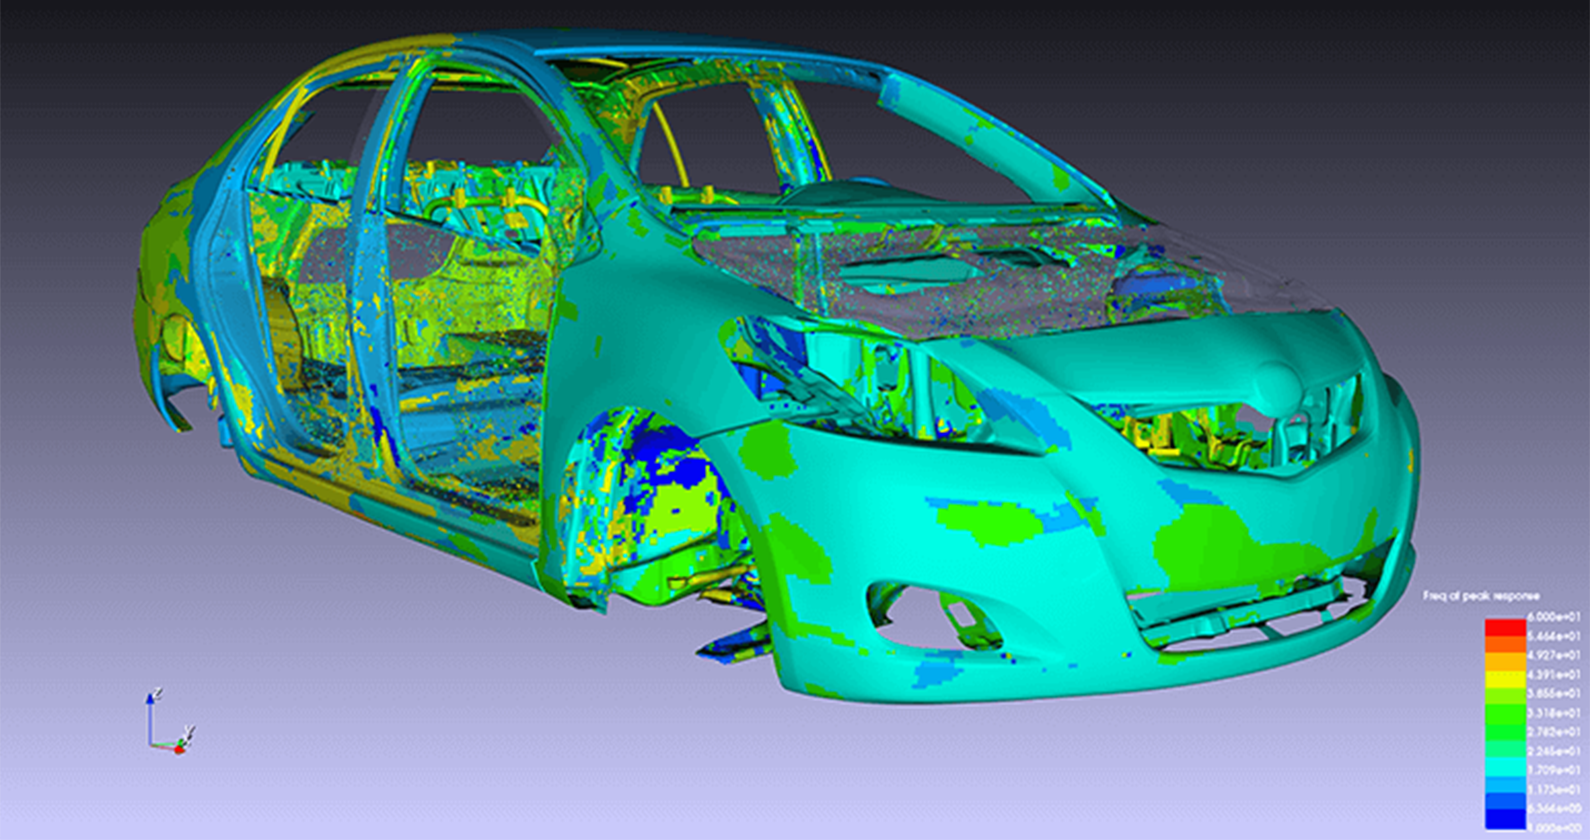 Render of a car in CAEfatigue Frequency package